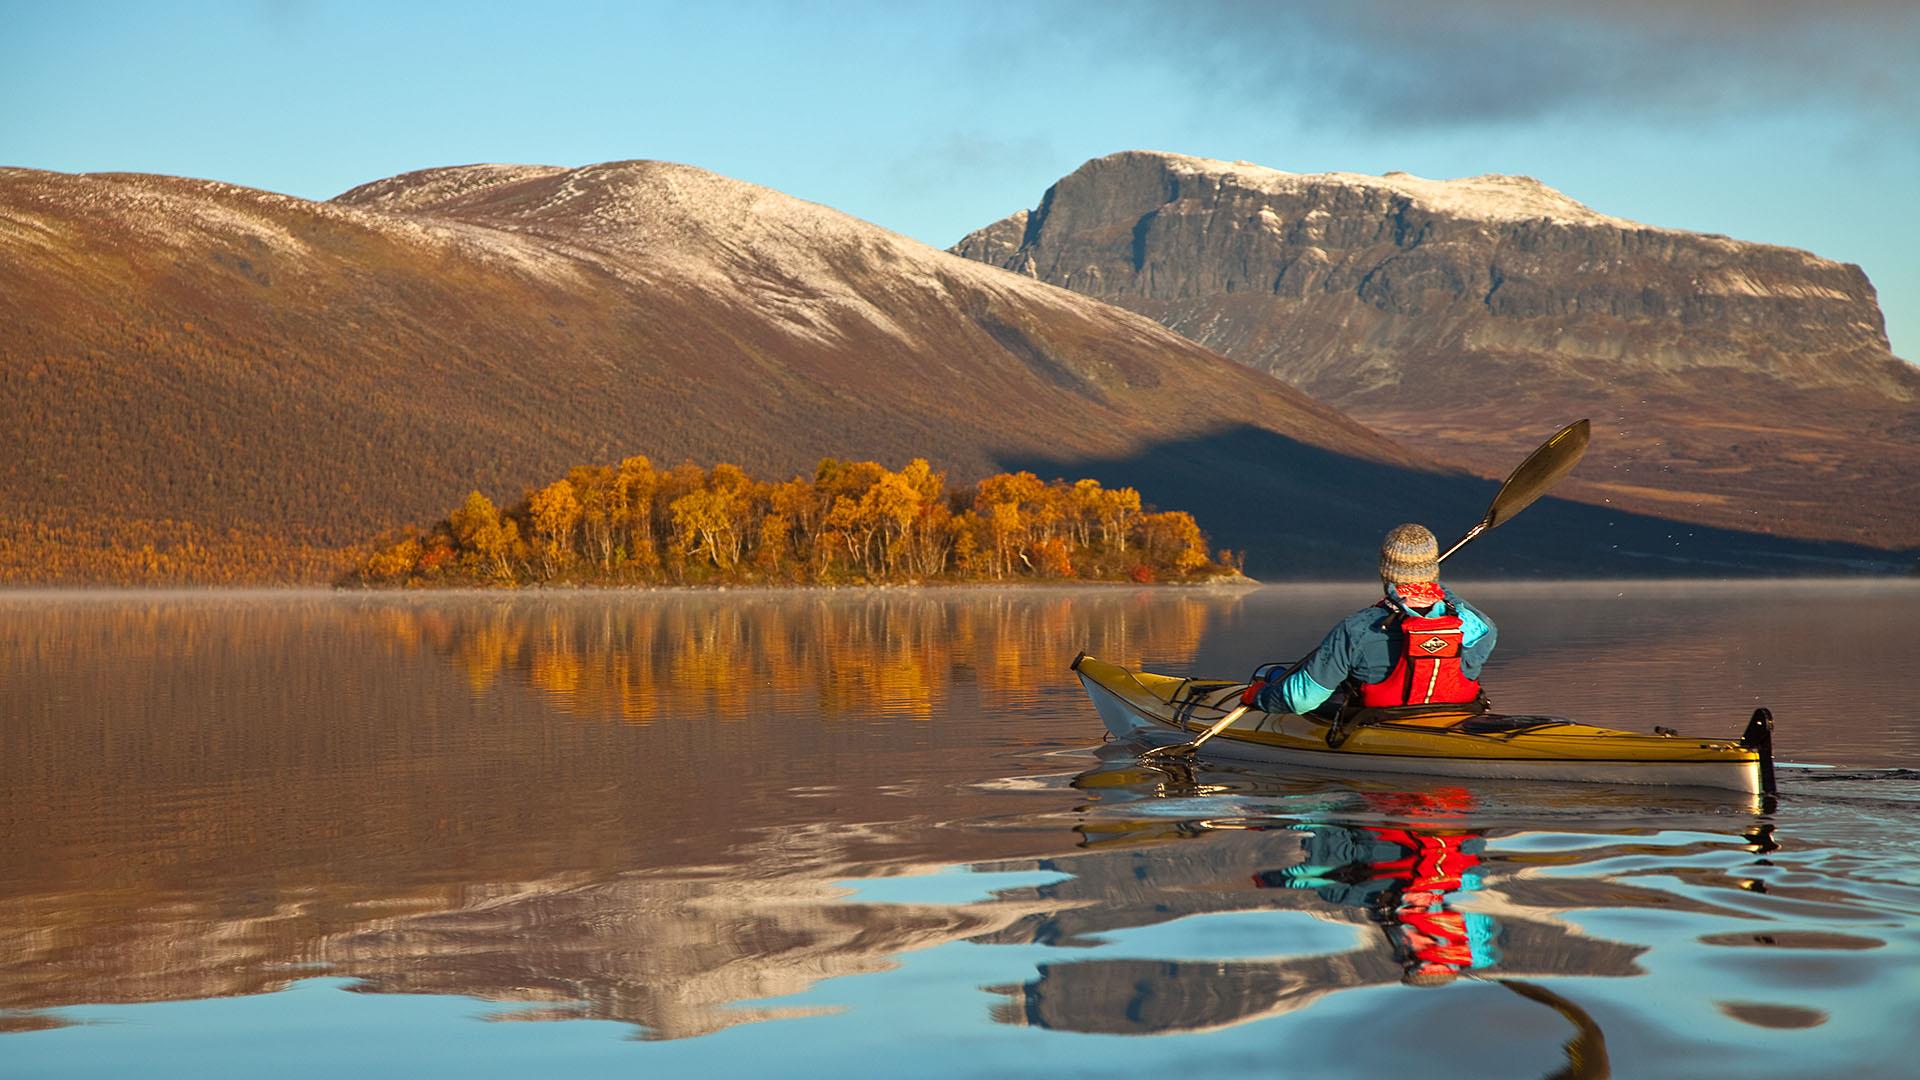 A person in a kayak on a calm mountain lake in autumn paddles towards an island with orange-coloured birch trees. In the background mountains with steep rock faces and the first new snow on the summits rise.